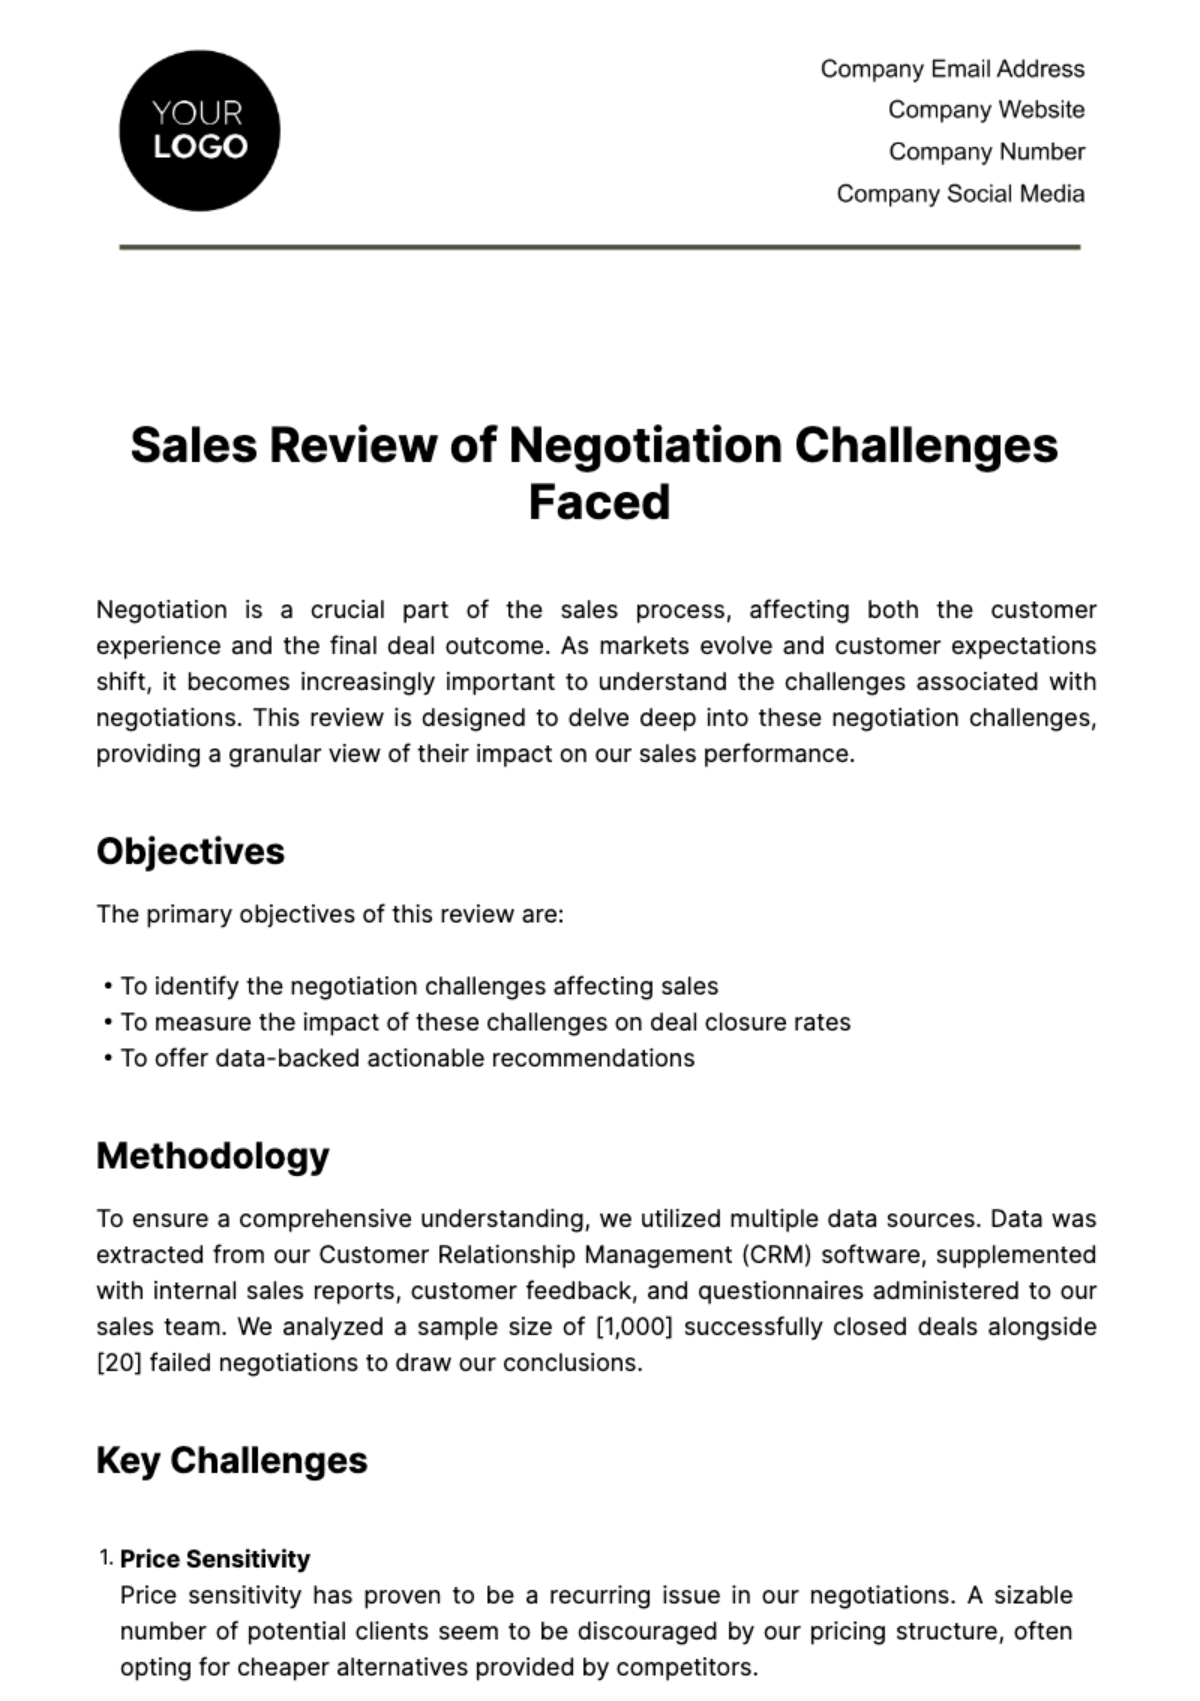 Sales Review of Negotiation Challenges Faced Template